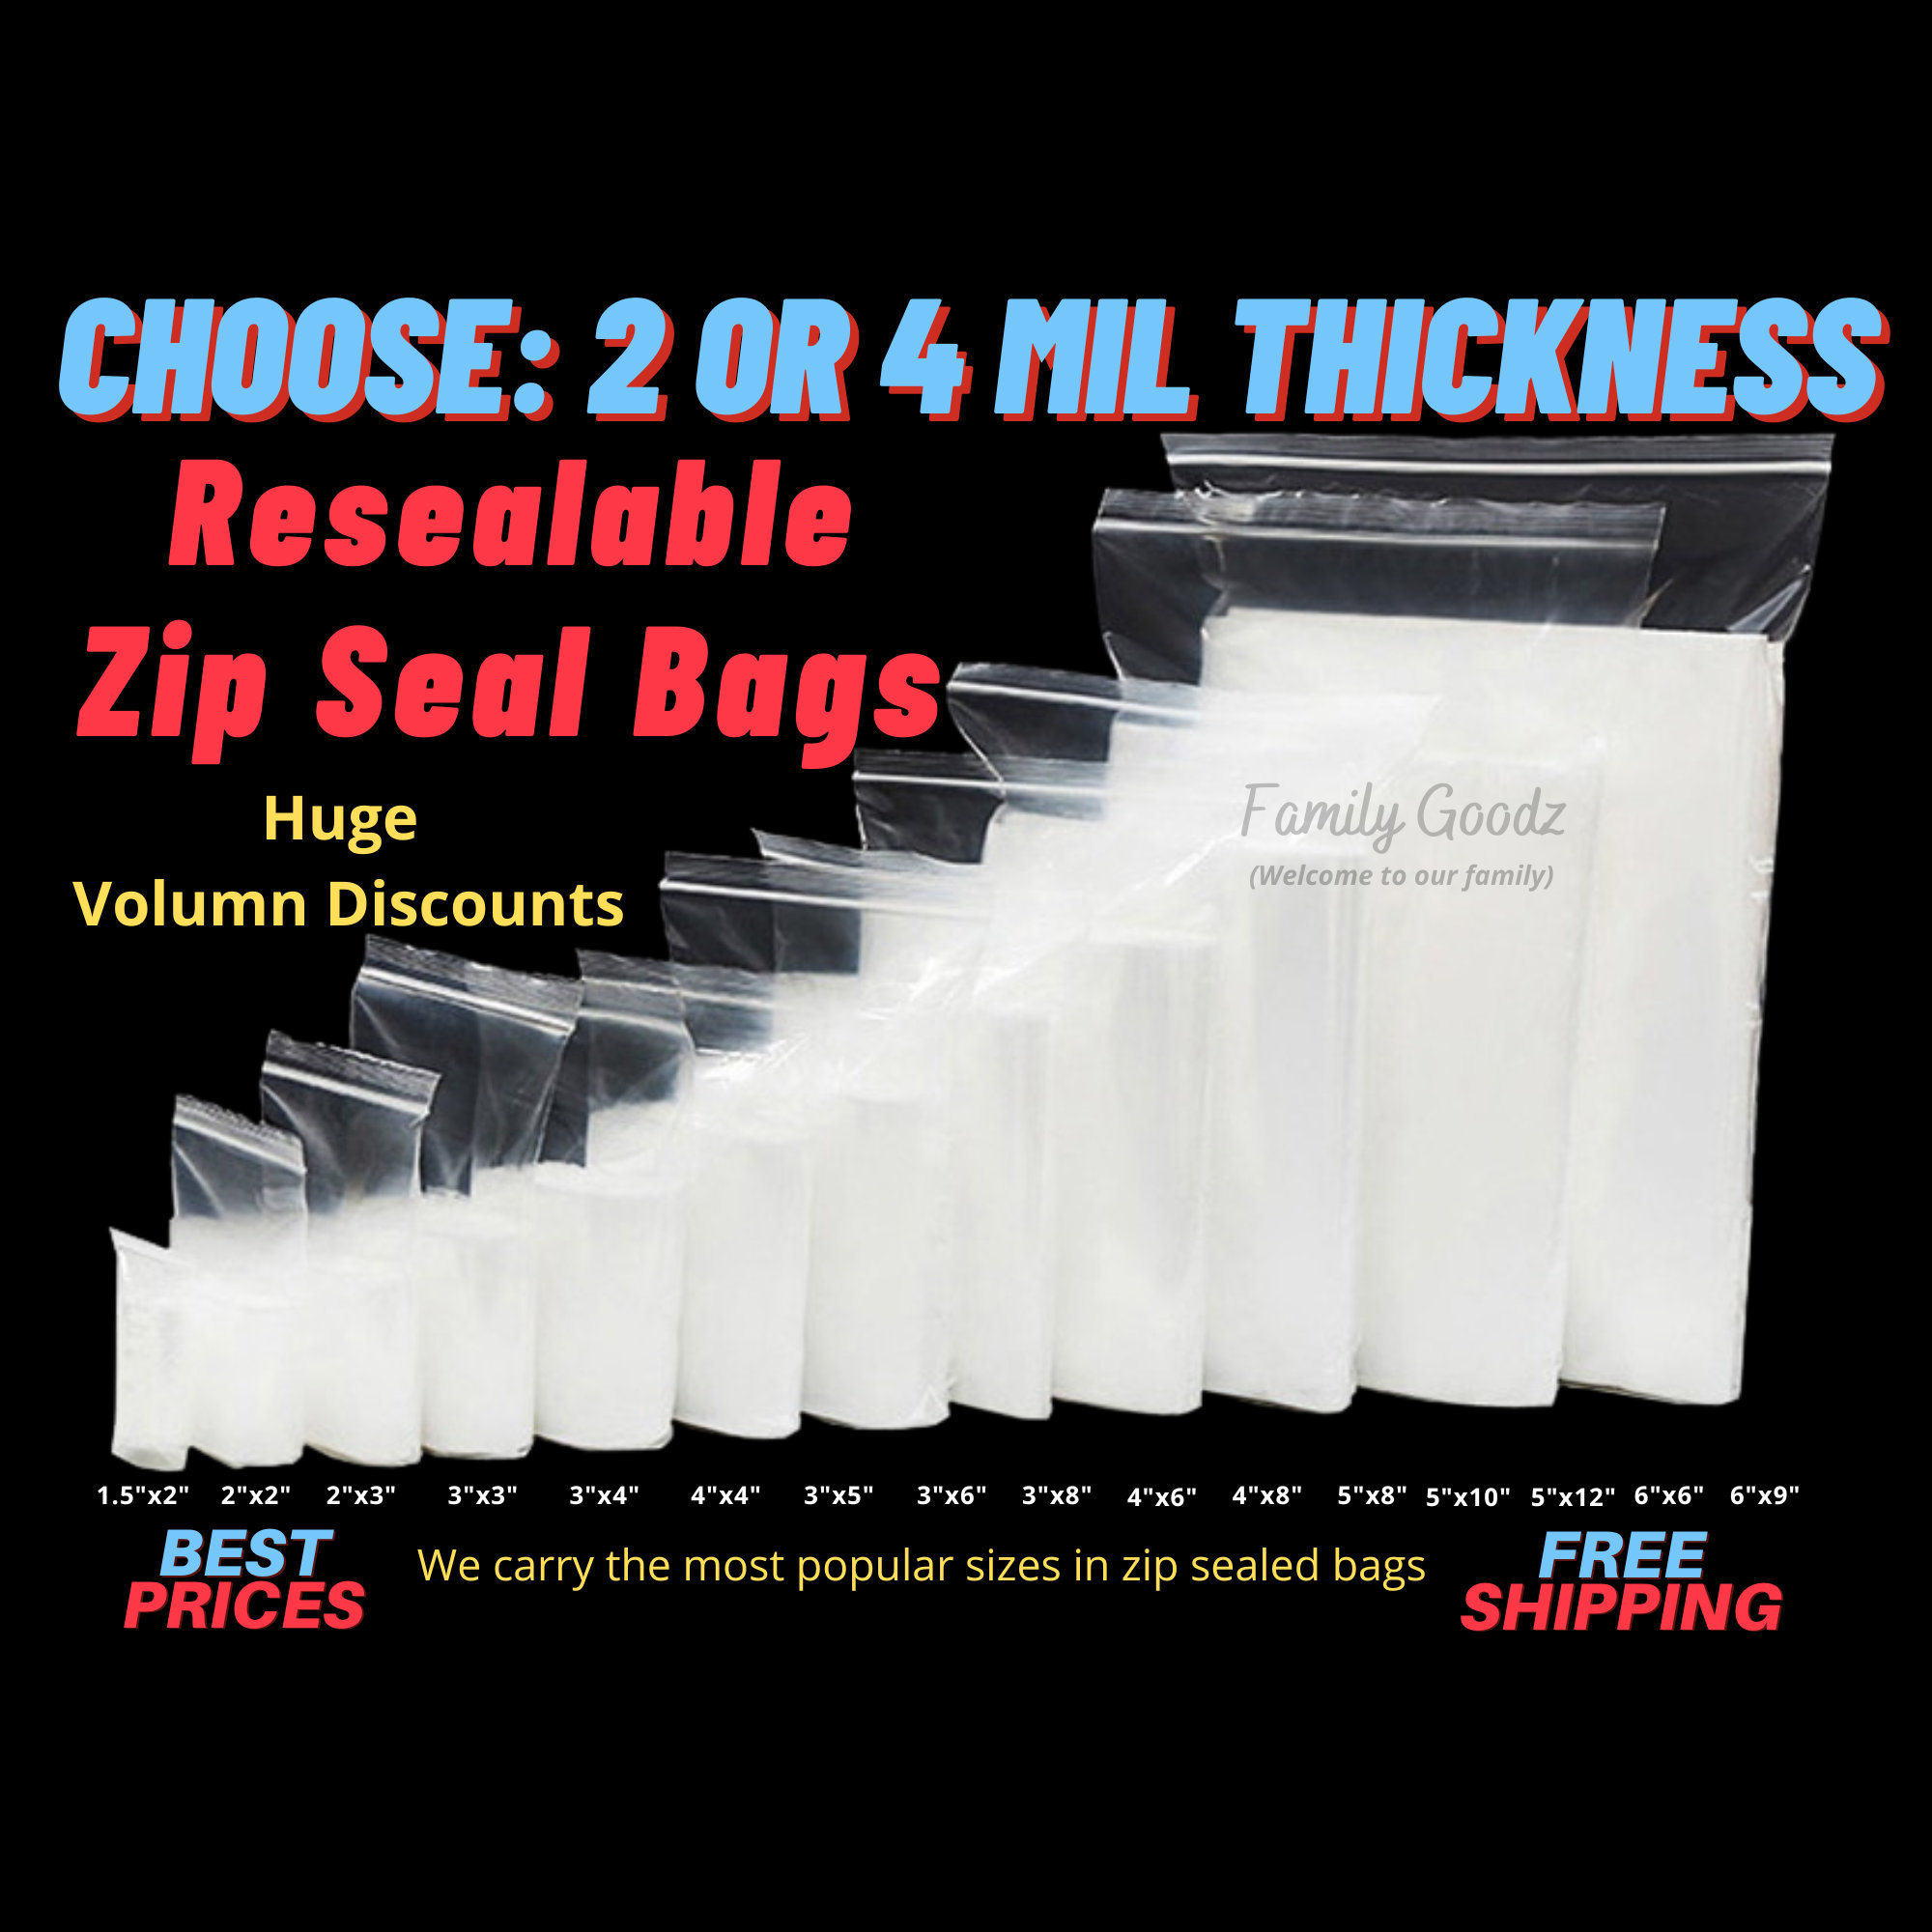 1000 Baggies 2 X 2 Small Reclosable Seal Clear Plastic Poly Bag 2.5mil